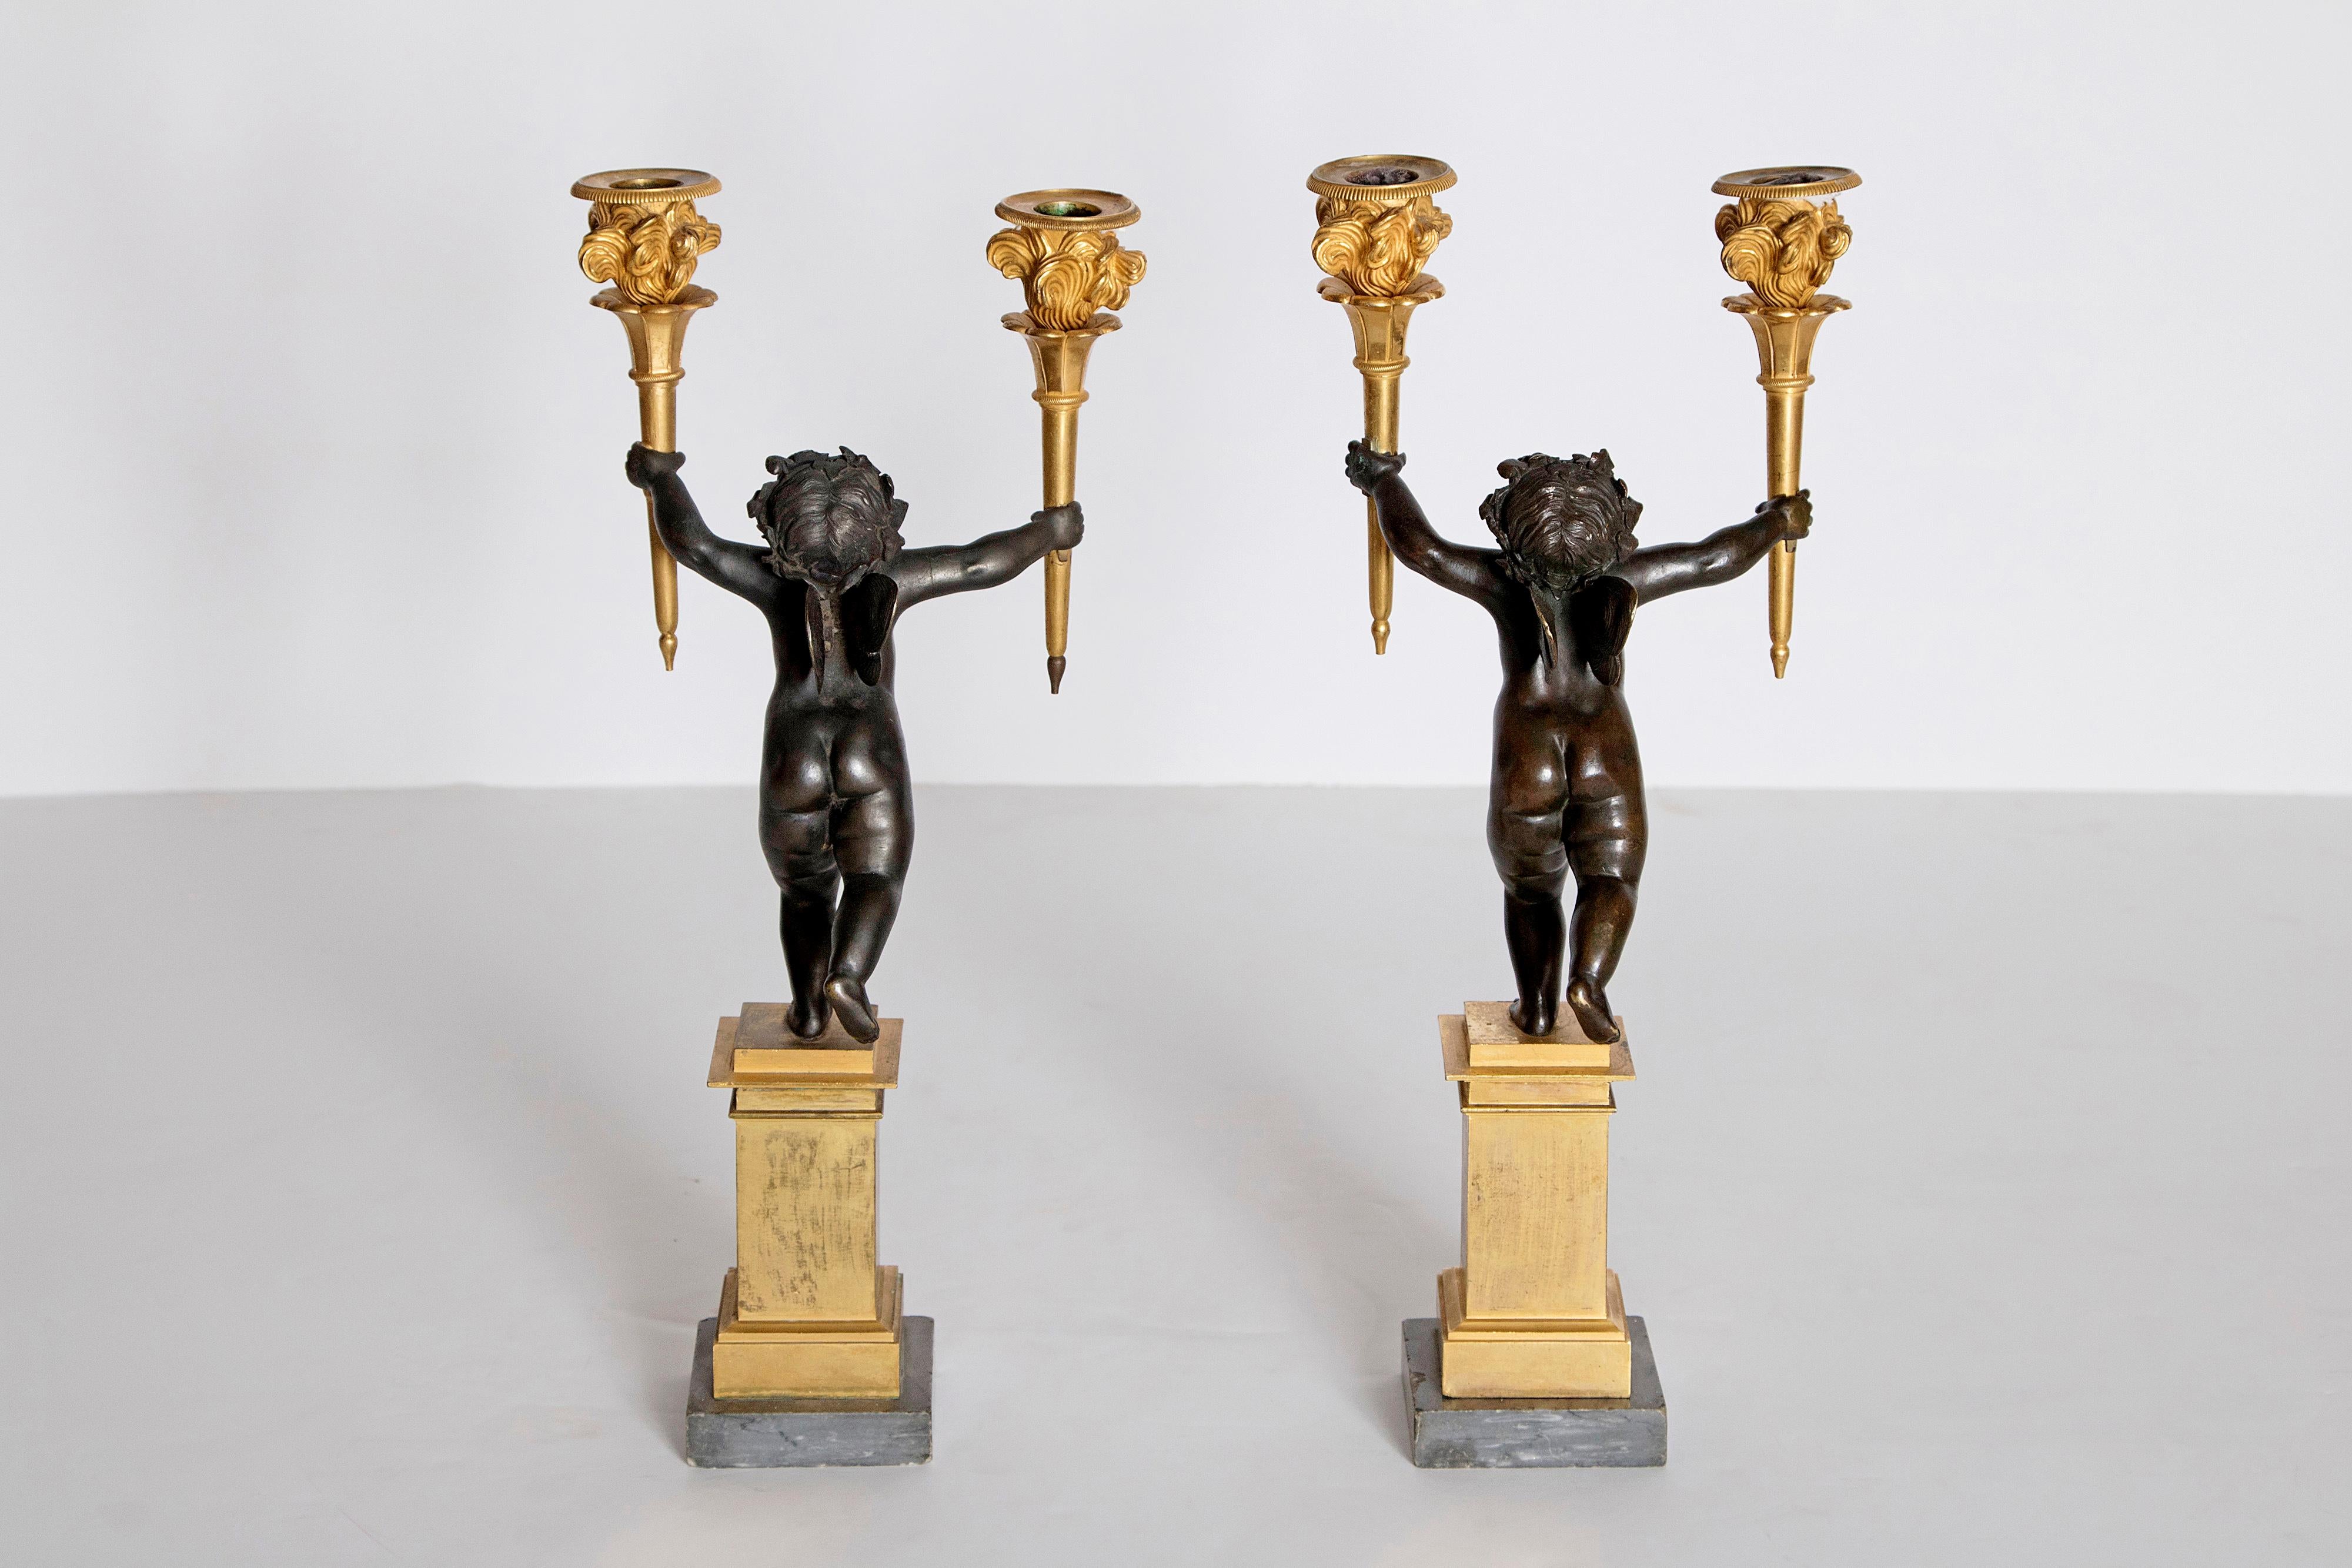 Pair of French Charles X Patinated Bronze and Gilt Figurative Candelabras For Sale 4